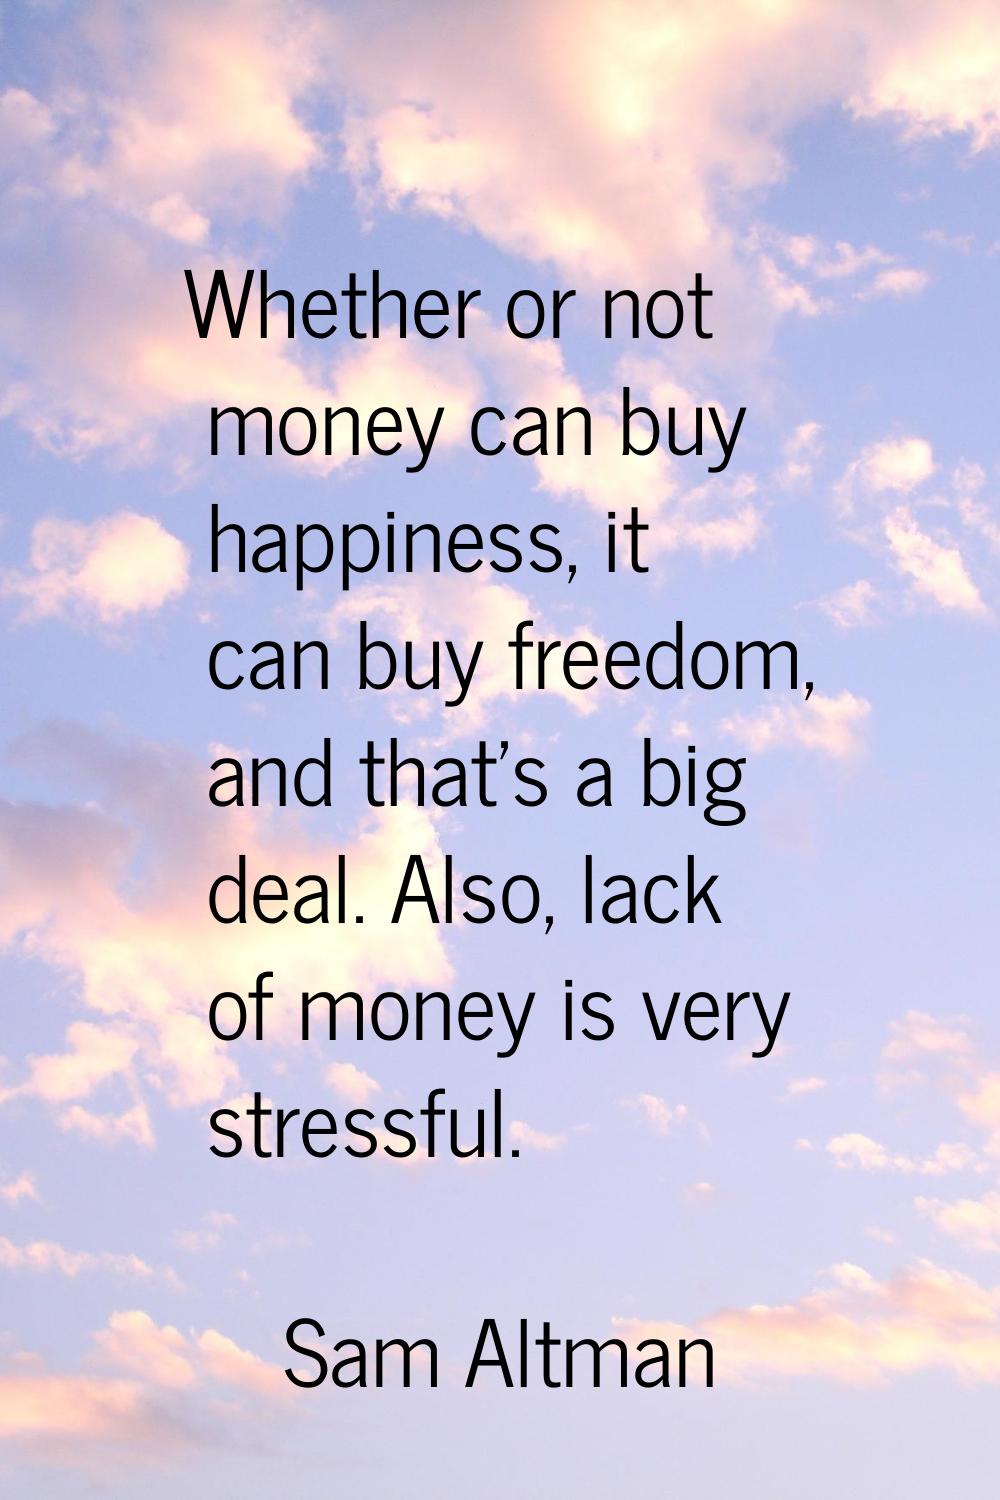 Whether or not money can buy happiness, it can buy freedom, and that's a big deal. Also, lack of mo